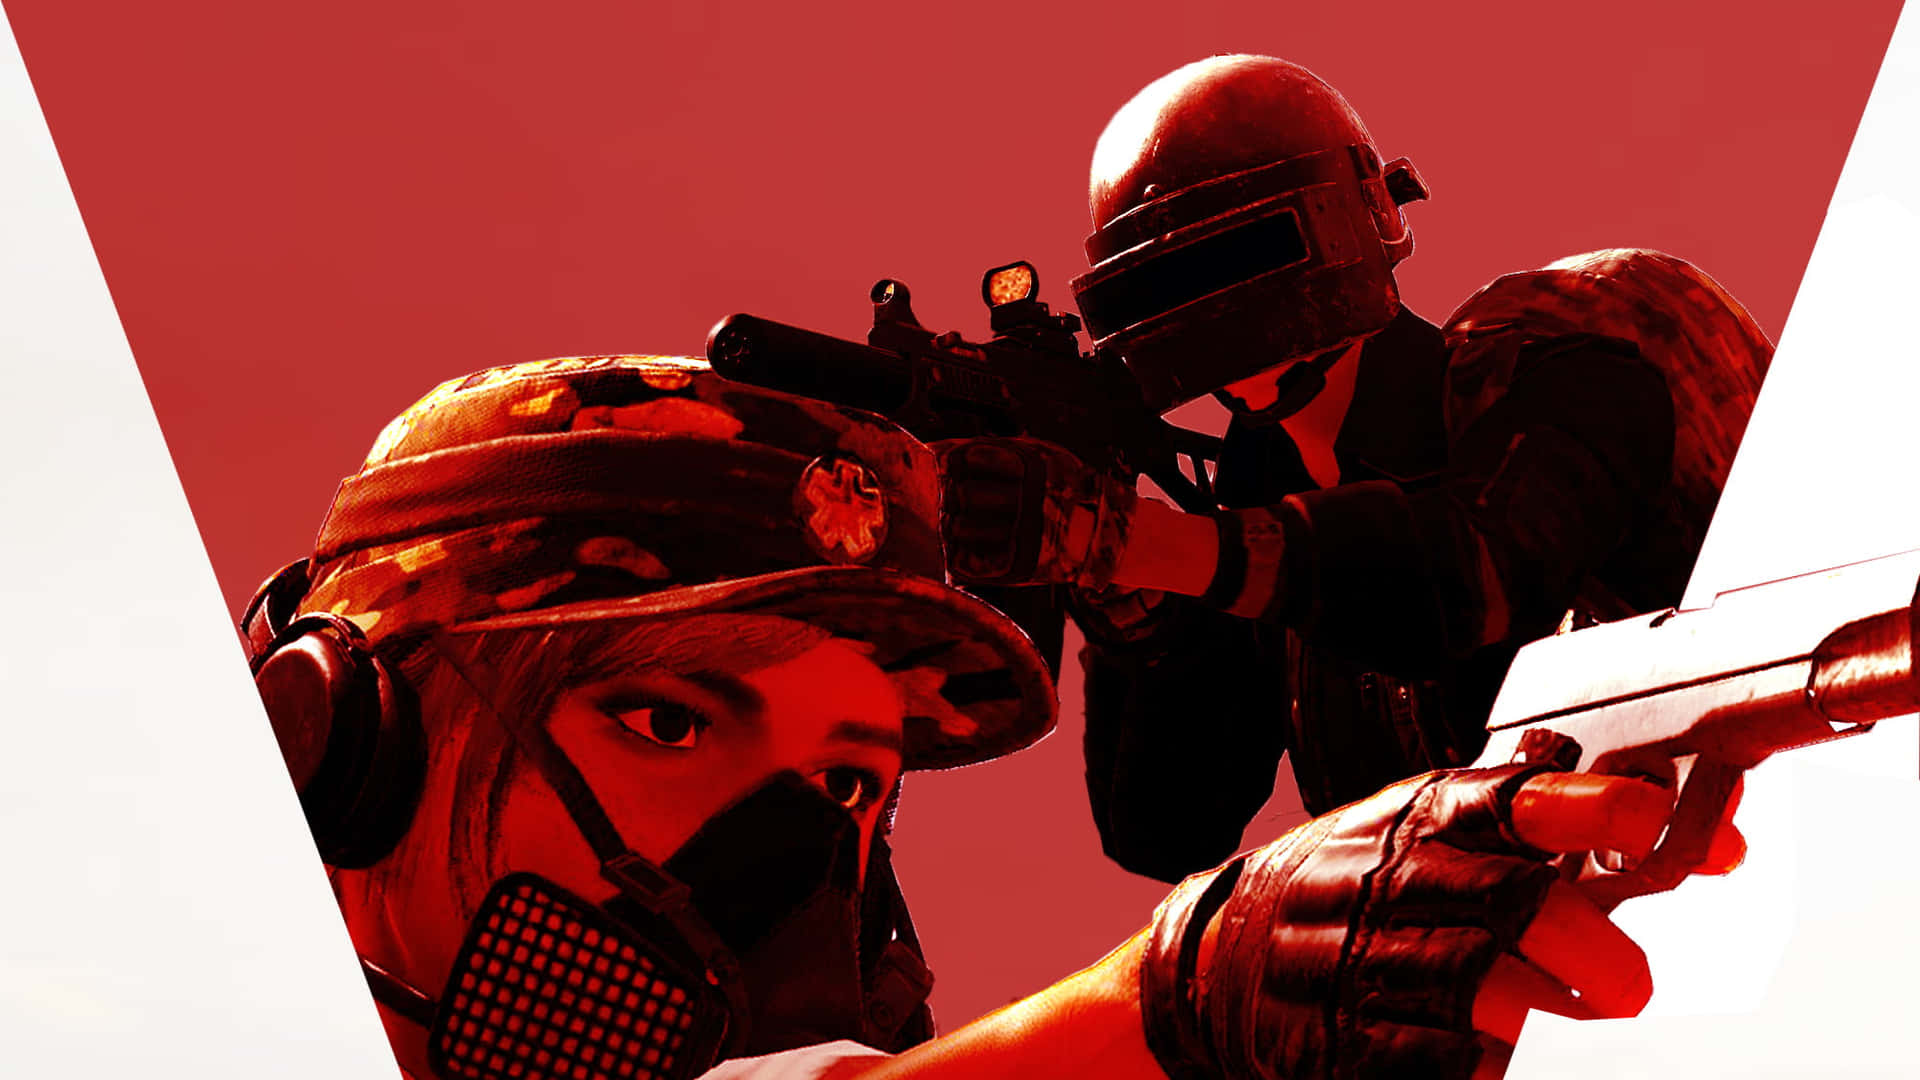 A Man And Woman Holding Guns In Front Of A Red Background Wallpaper